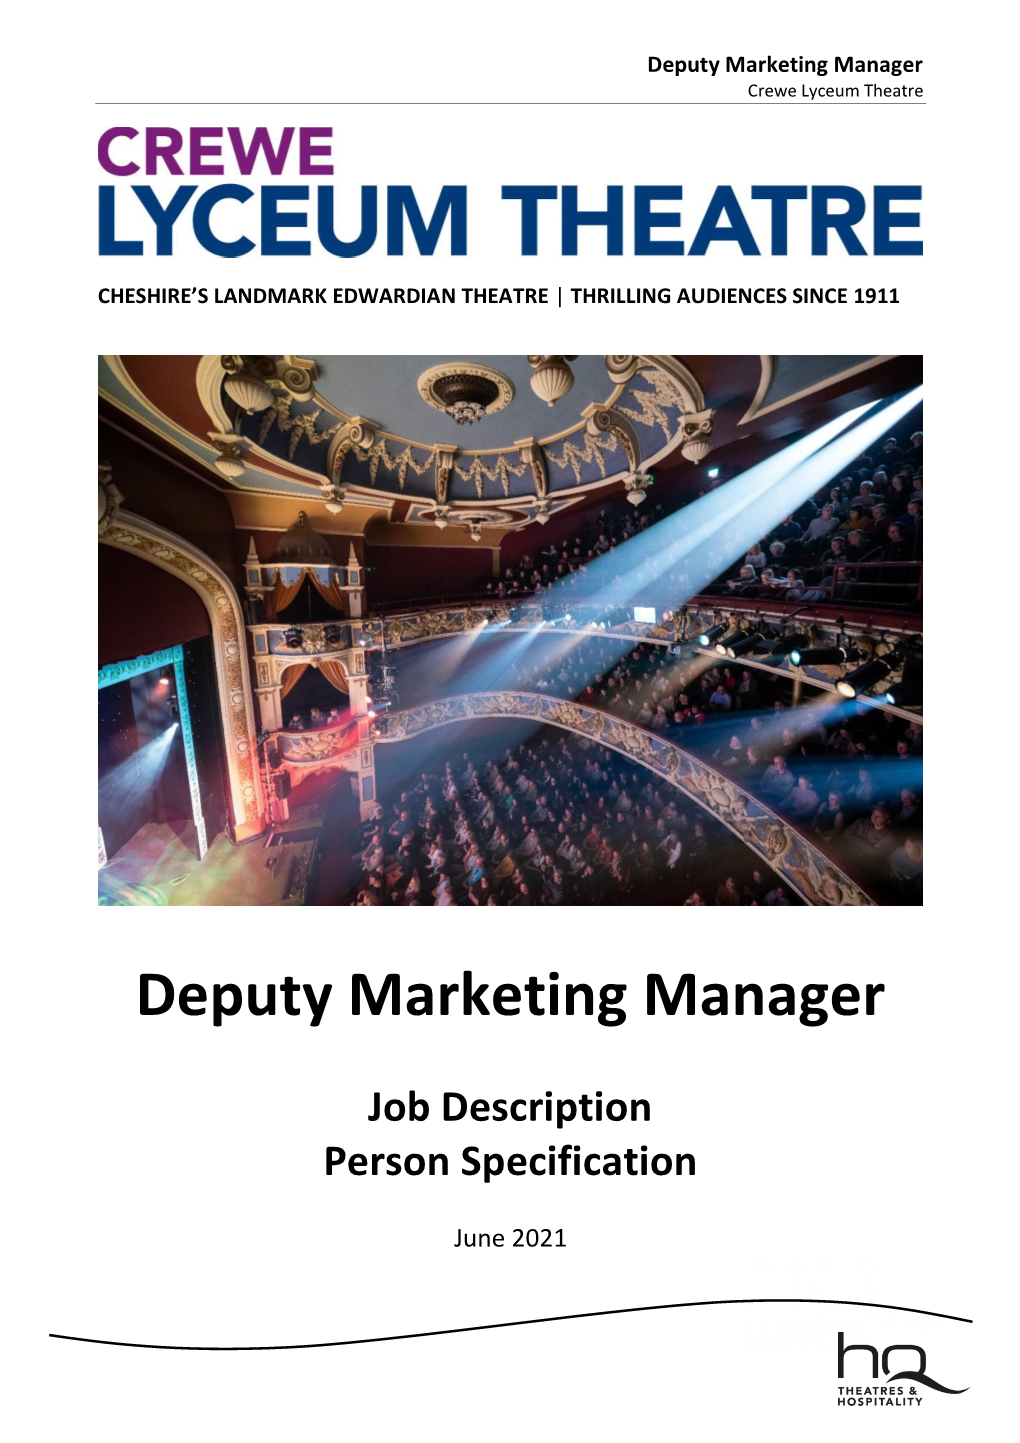 Deputy Marketing Manager Crewe Lyceum Theatre